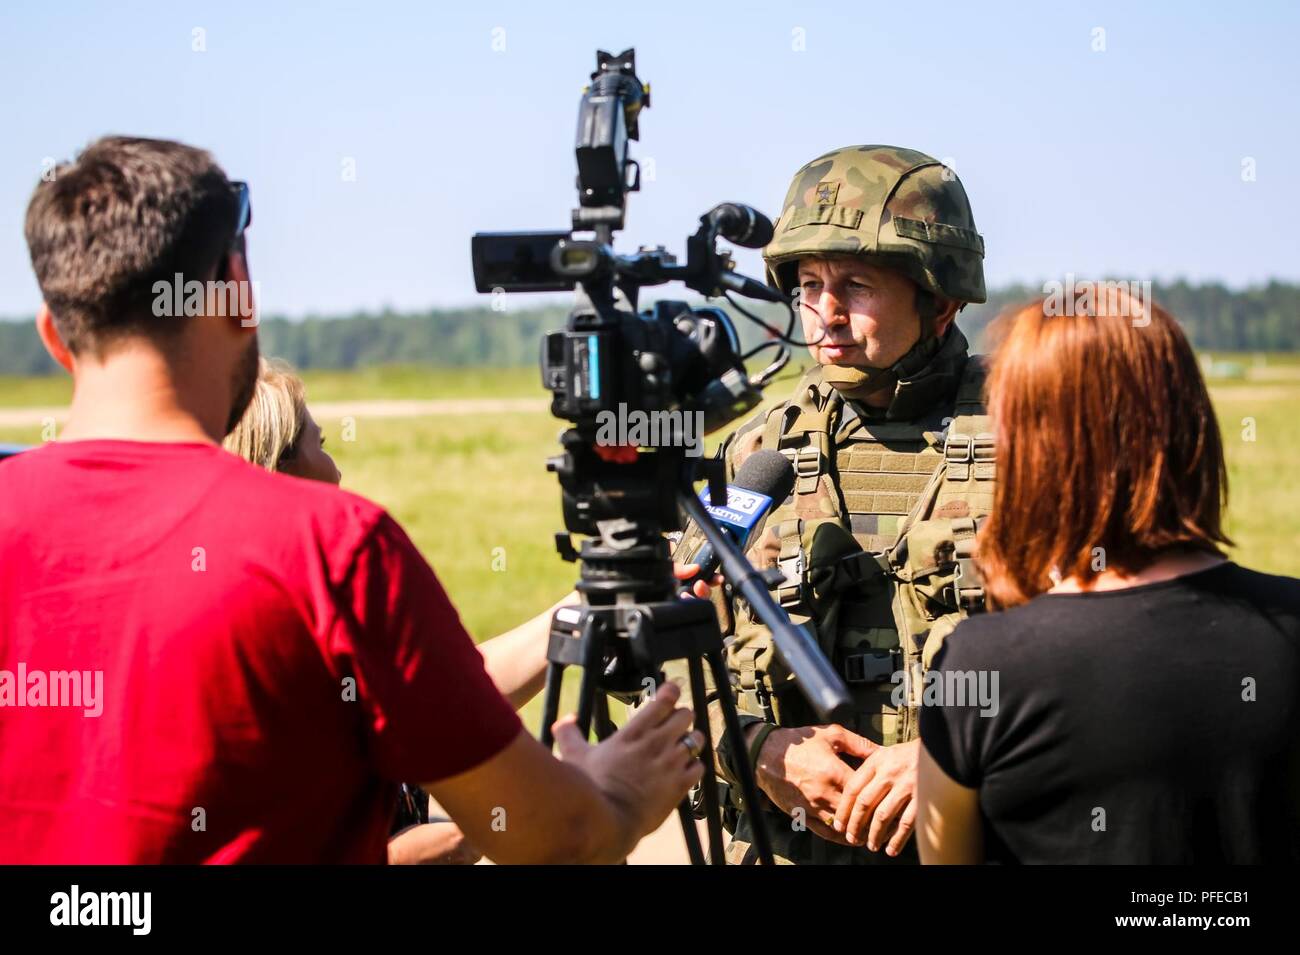 Polish Brig. Gen. Jarosław Gromadziński, 15th Mechanized Brigade commander, is interviewed by local media during the opening ceremony of Saber Strike 18 with Battle Group Poland at Wierzbiny, Poland, June 4, 2018. Saber Strike is a multinational exercise currently in its eighth year. This year's exercise, which runs from June 3-15, tests allies and partners from 19 countries on their ability work together to deter aggression in the region and improve each unit's ability to perform their designated mission. Stock Photo